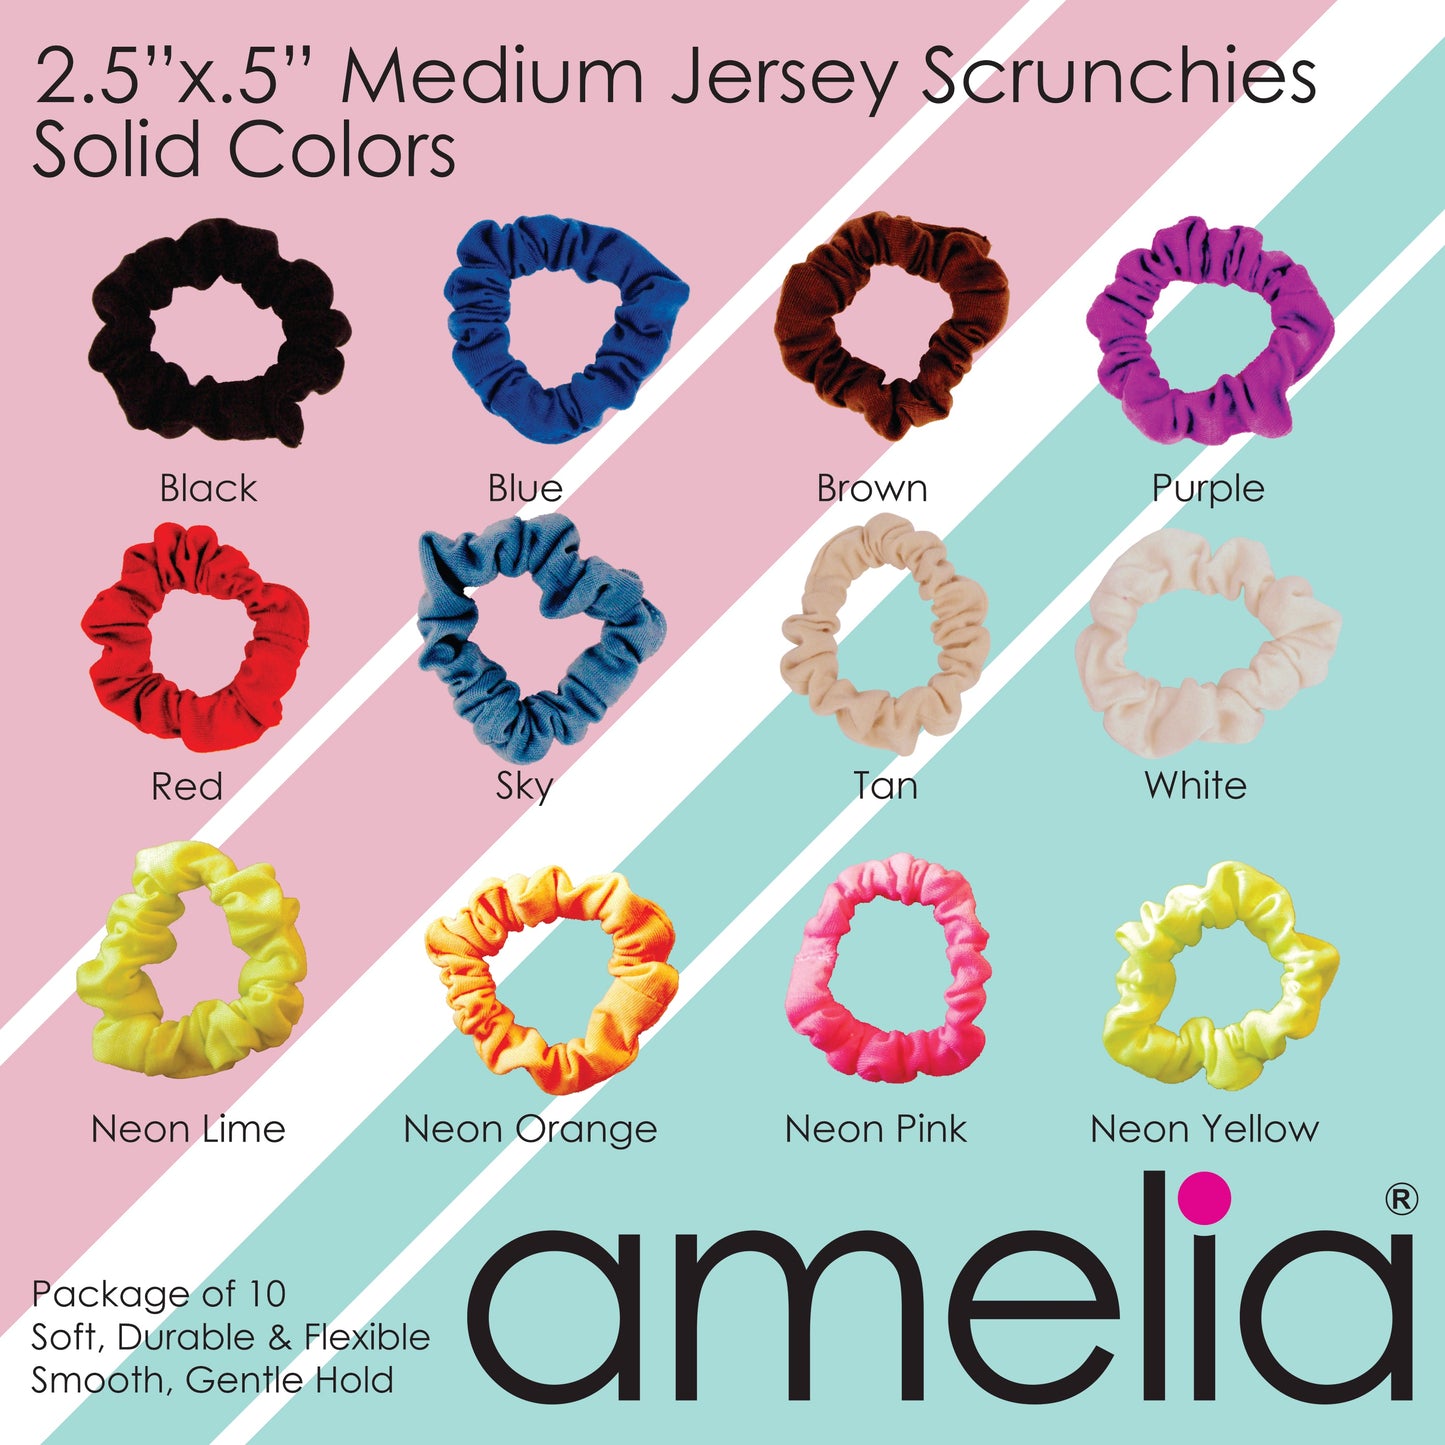 Amelia Beauty, Medium White Jersey Scrunchies, 2.5in Diameter, Gentle on Hair, Strong Hold, No Snag, No Dents or Creases. 10 Pack - 12 Retail Packs